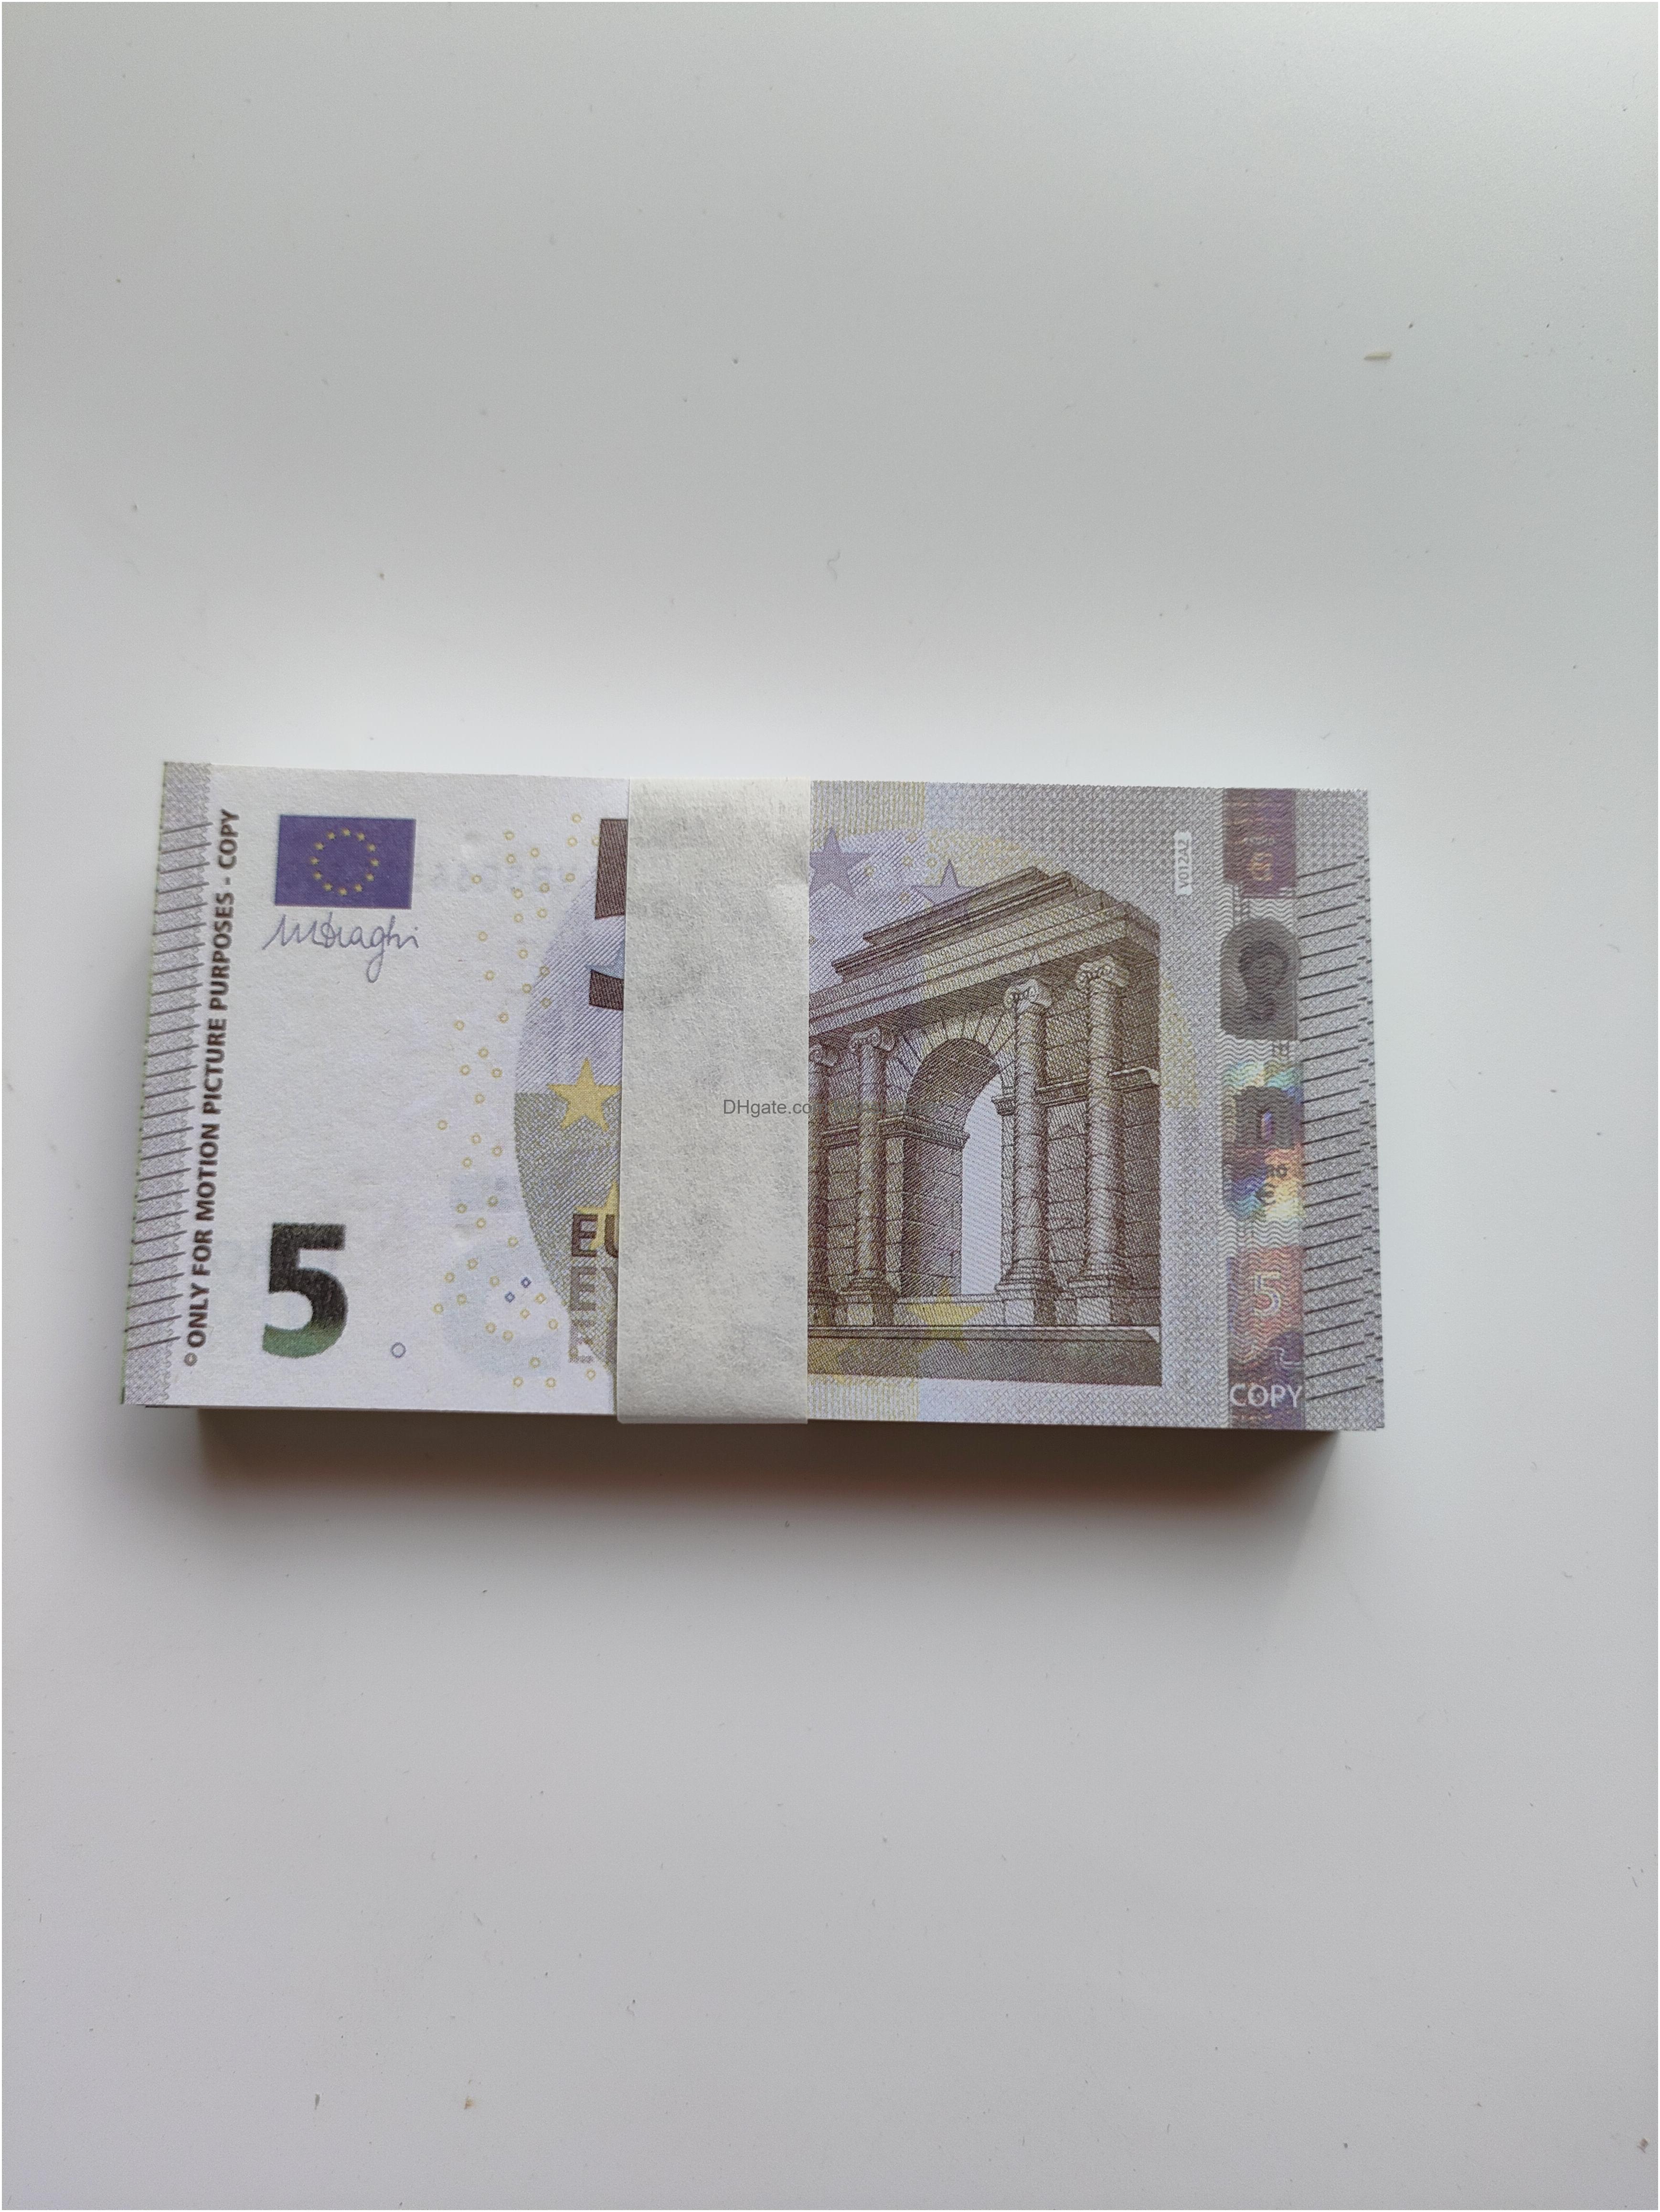 Other Event Party Supplies Prop Money Copy Banknote Fake 10 20 50 Euro Toy Currency Children Gift Drop Delivery Home Garden Festive